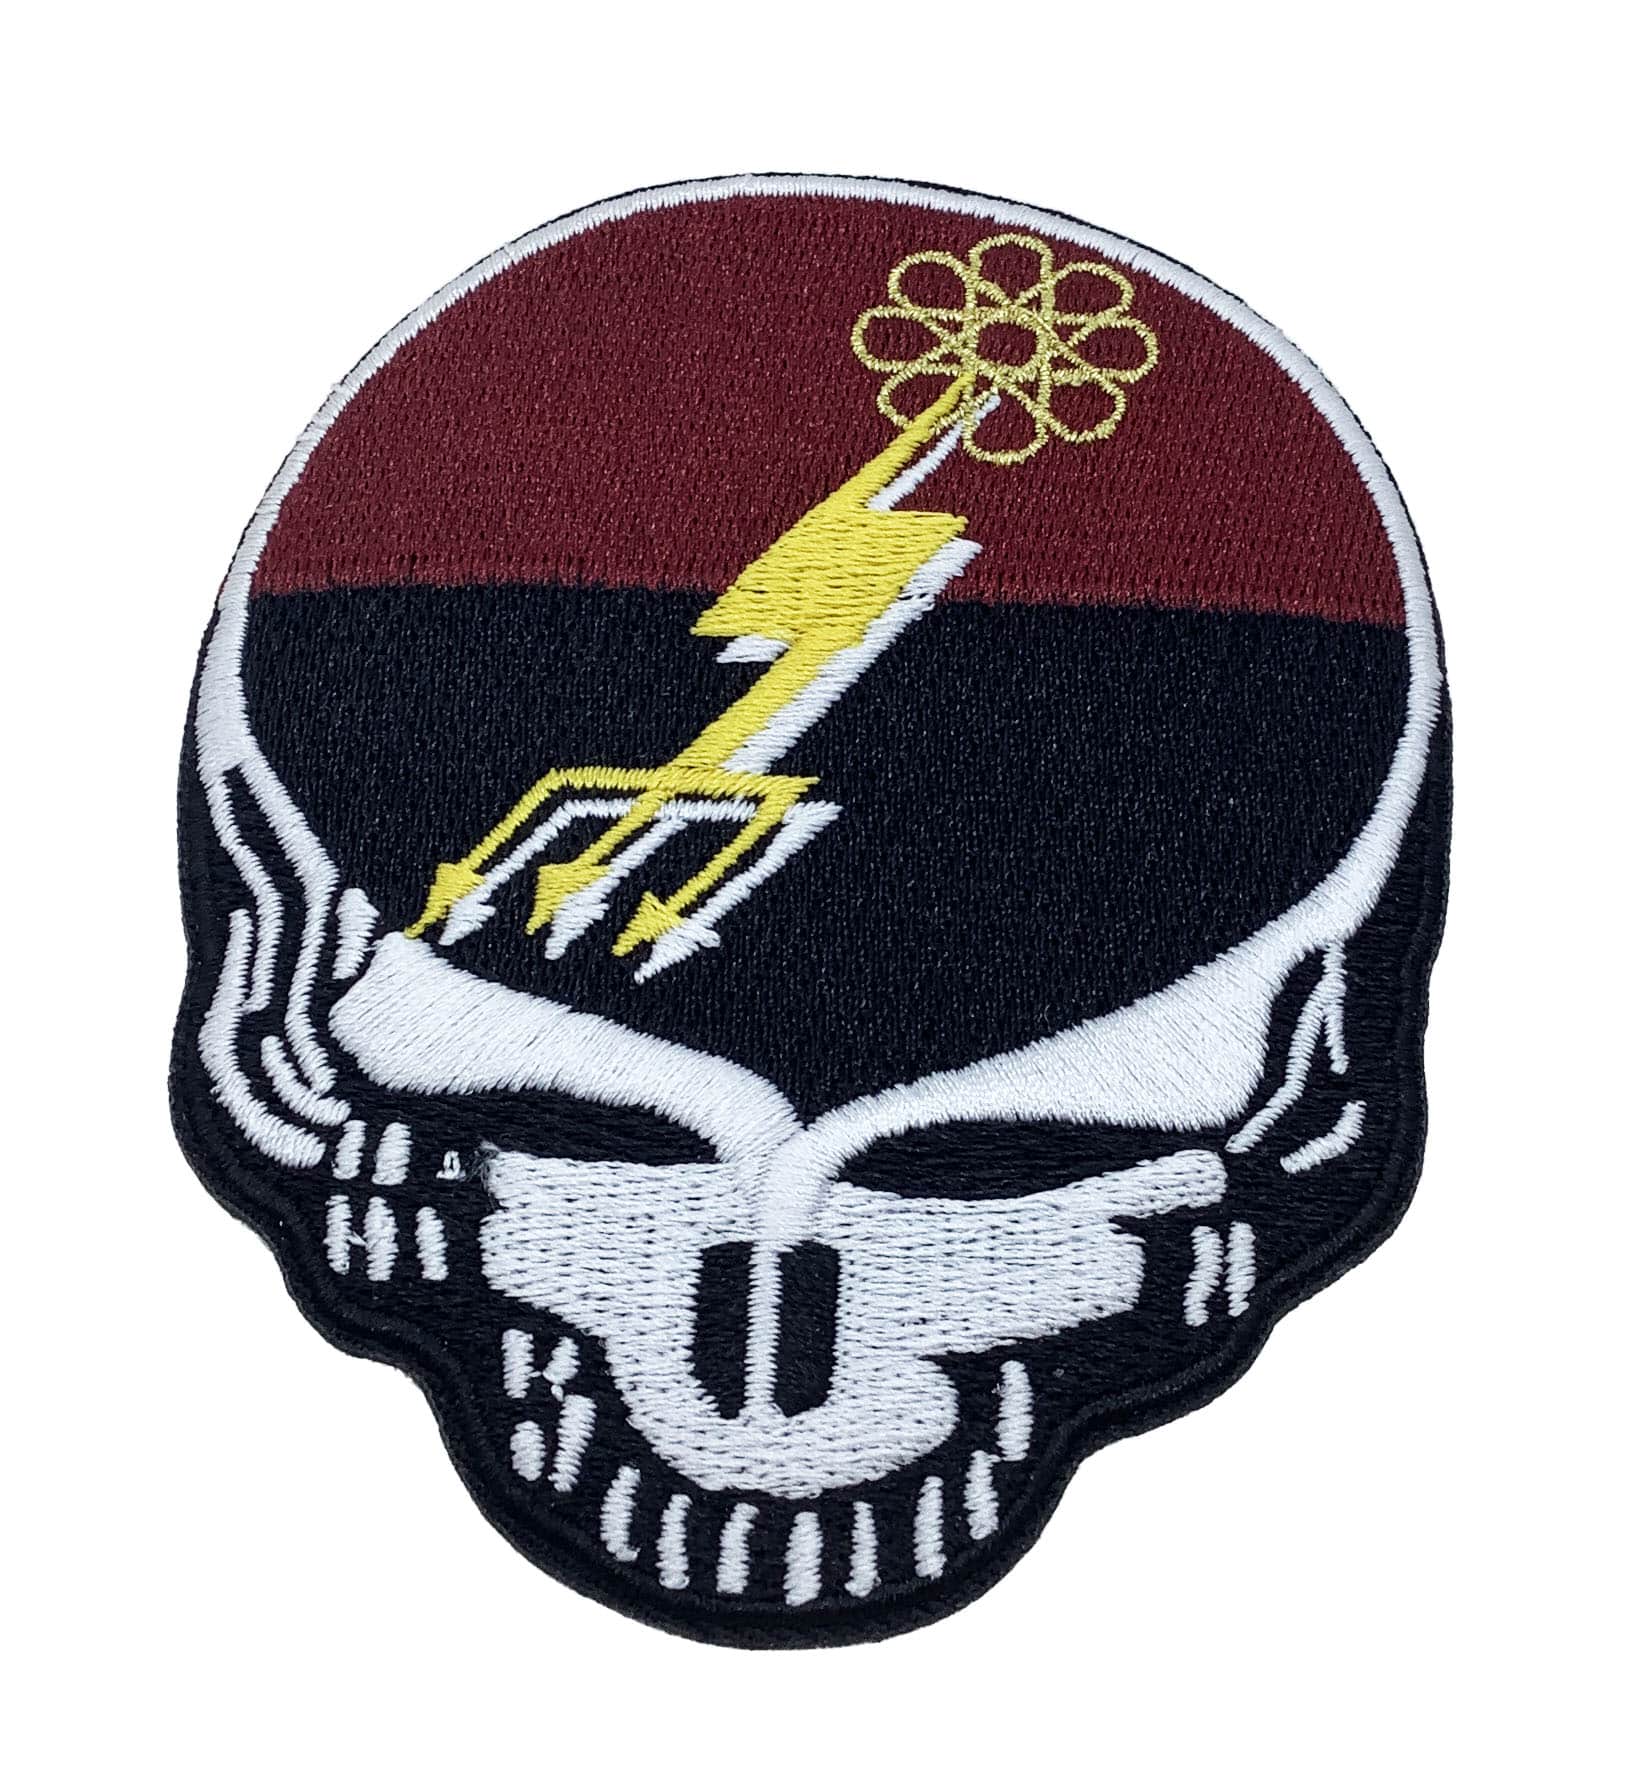 VAQ-133 Wizards Dead Head Patch - With Hook and Loop